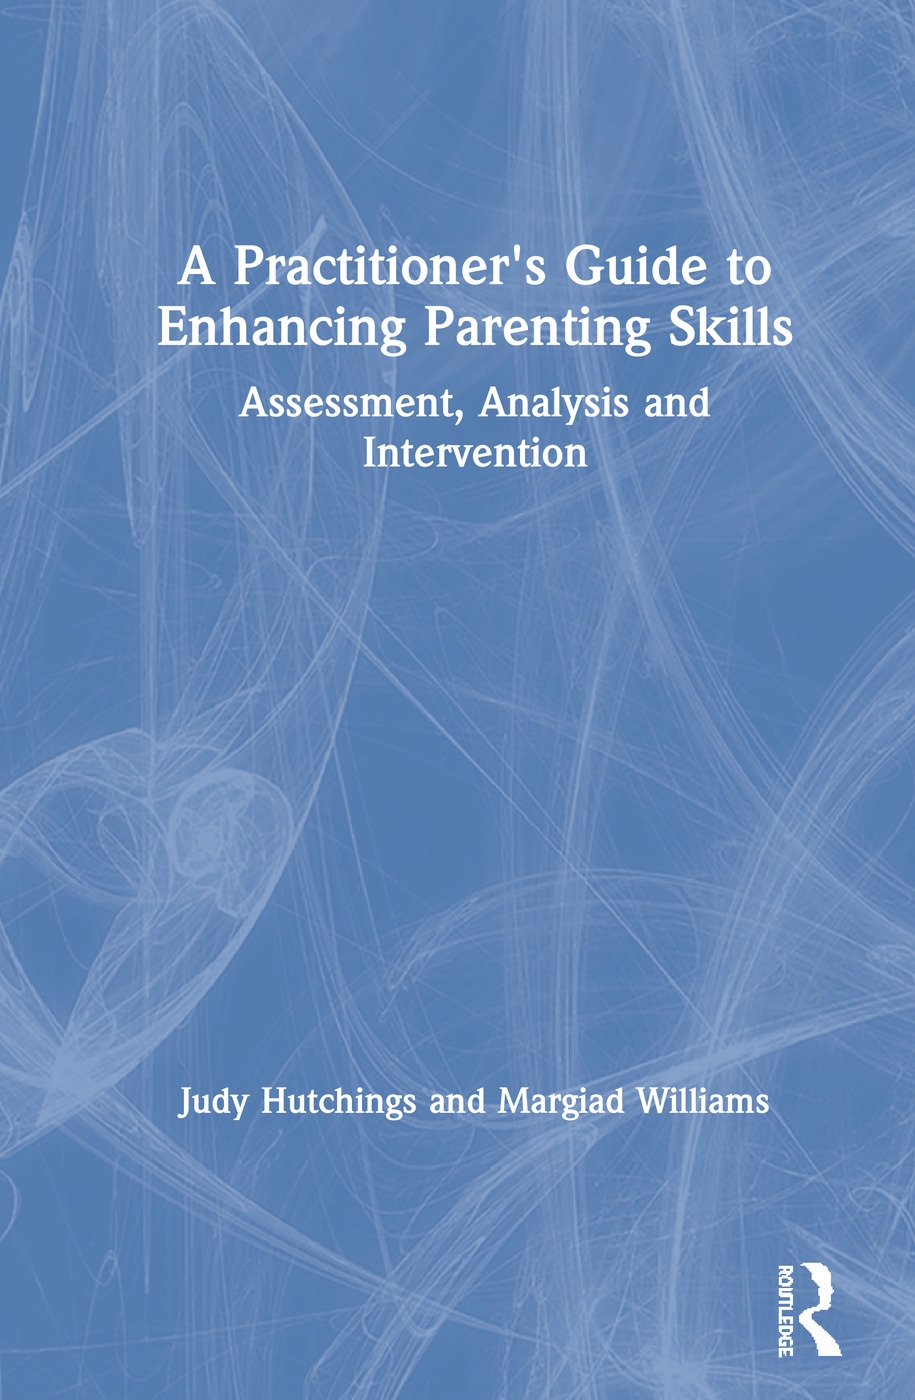 A Practitioner’s Guide to Enhancing Parenting Skills: Assessment, Analysis and Intervention